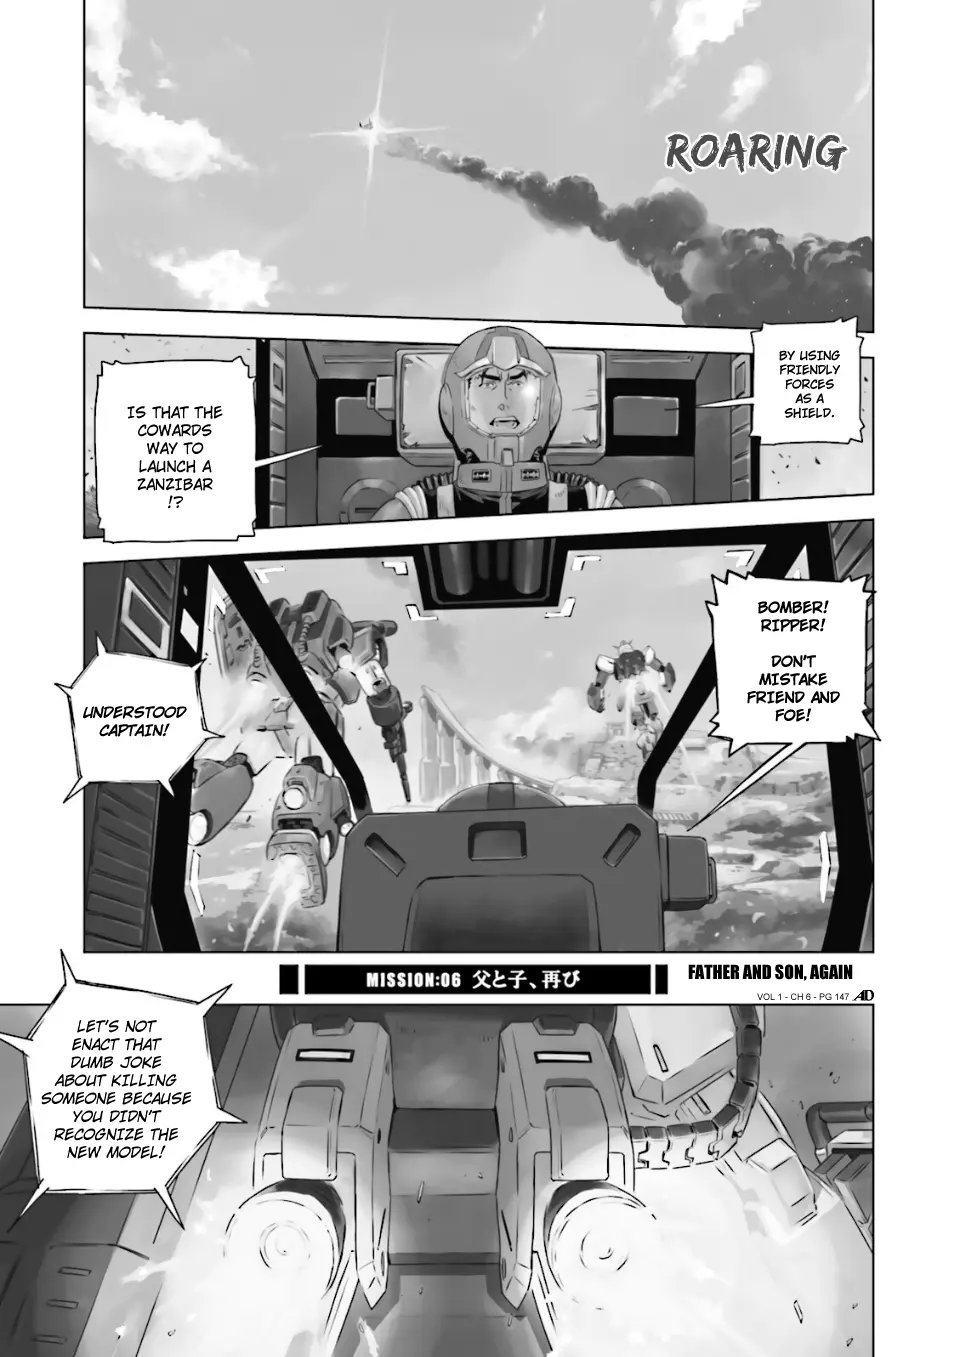 Mobile Suit Gundam Side Story - Missing Link - 6 page 1-9304b7ea